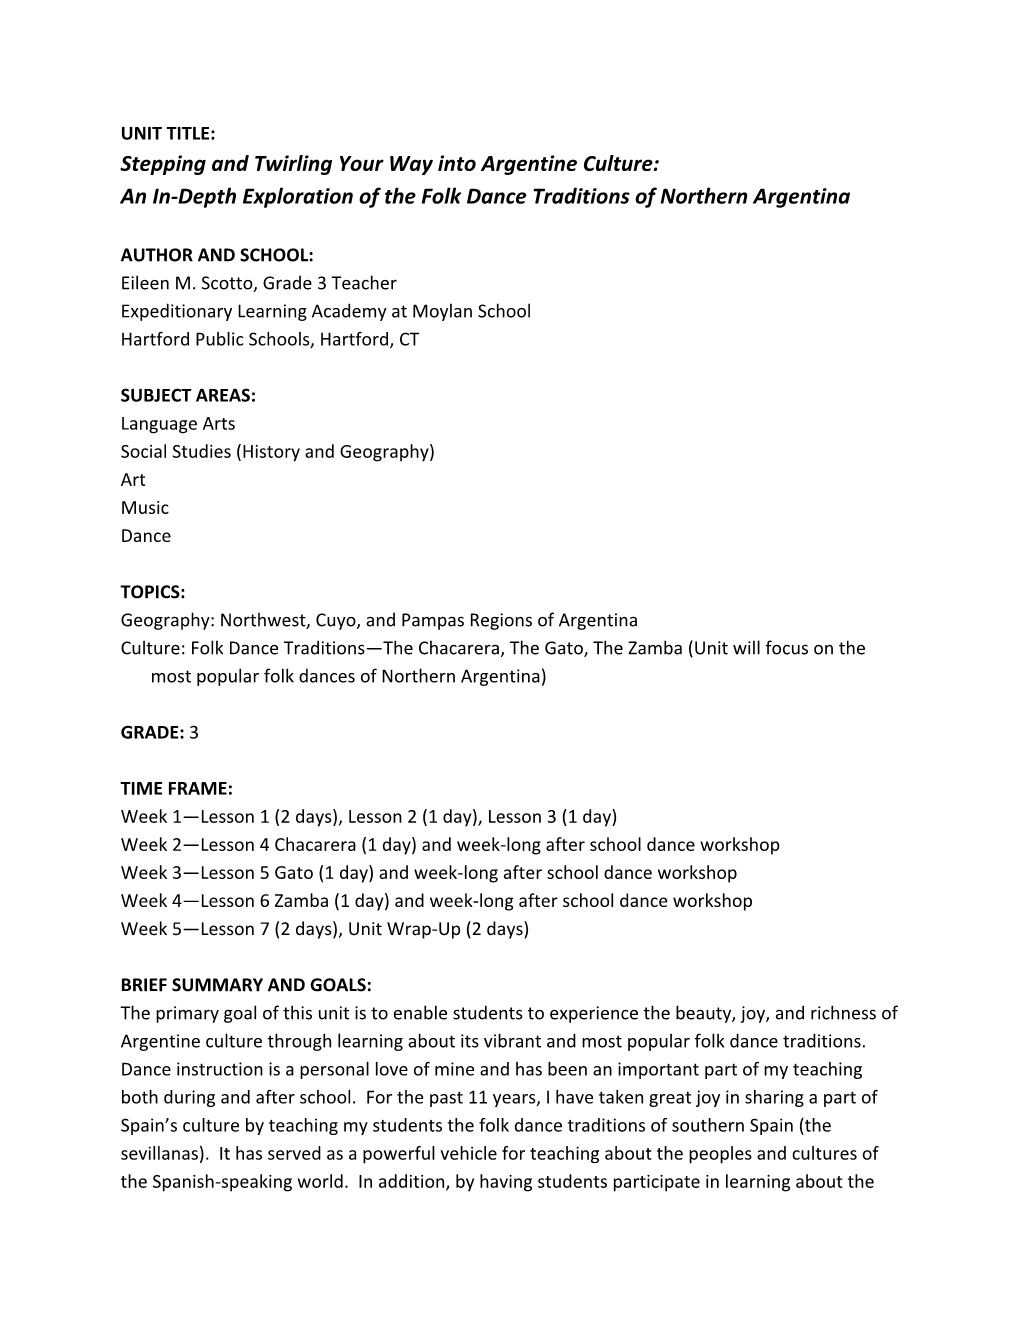 Stepping and Twirling Your Way Into Argentine Culture: an In‐Depth Exploration of the Folk Dance Traditions of Northern Argentina